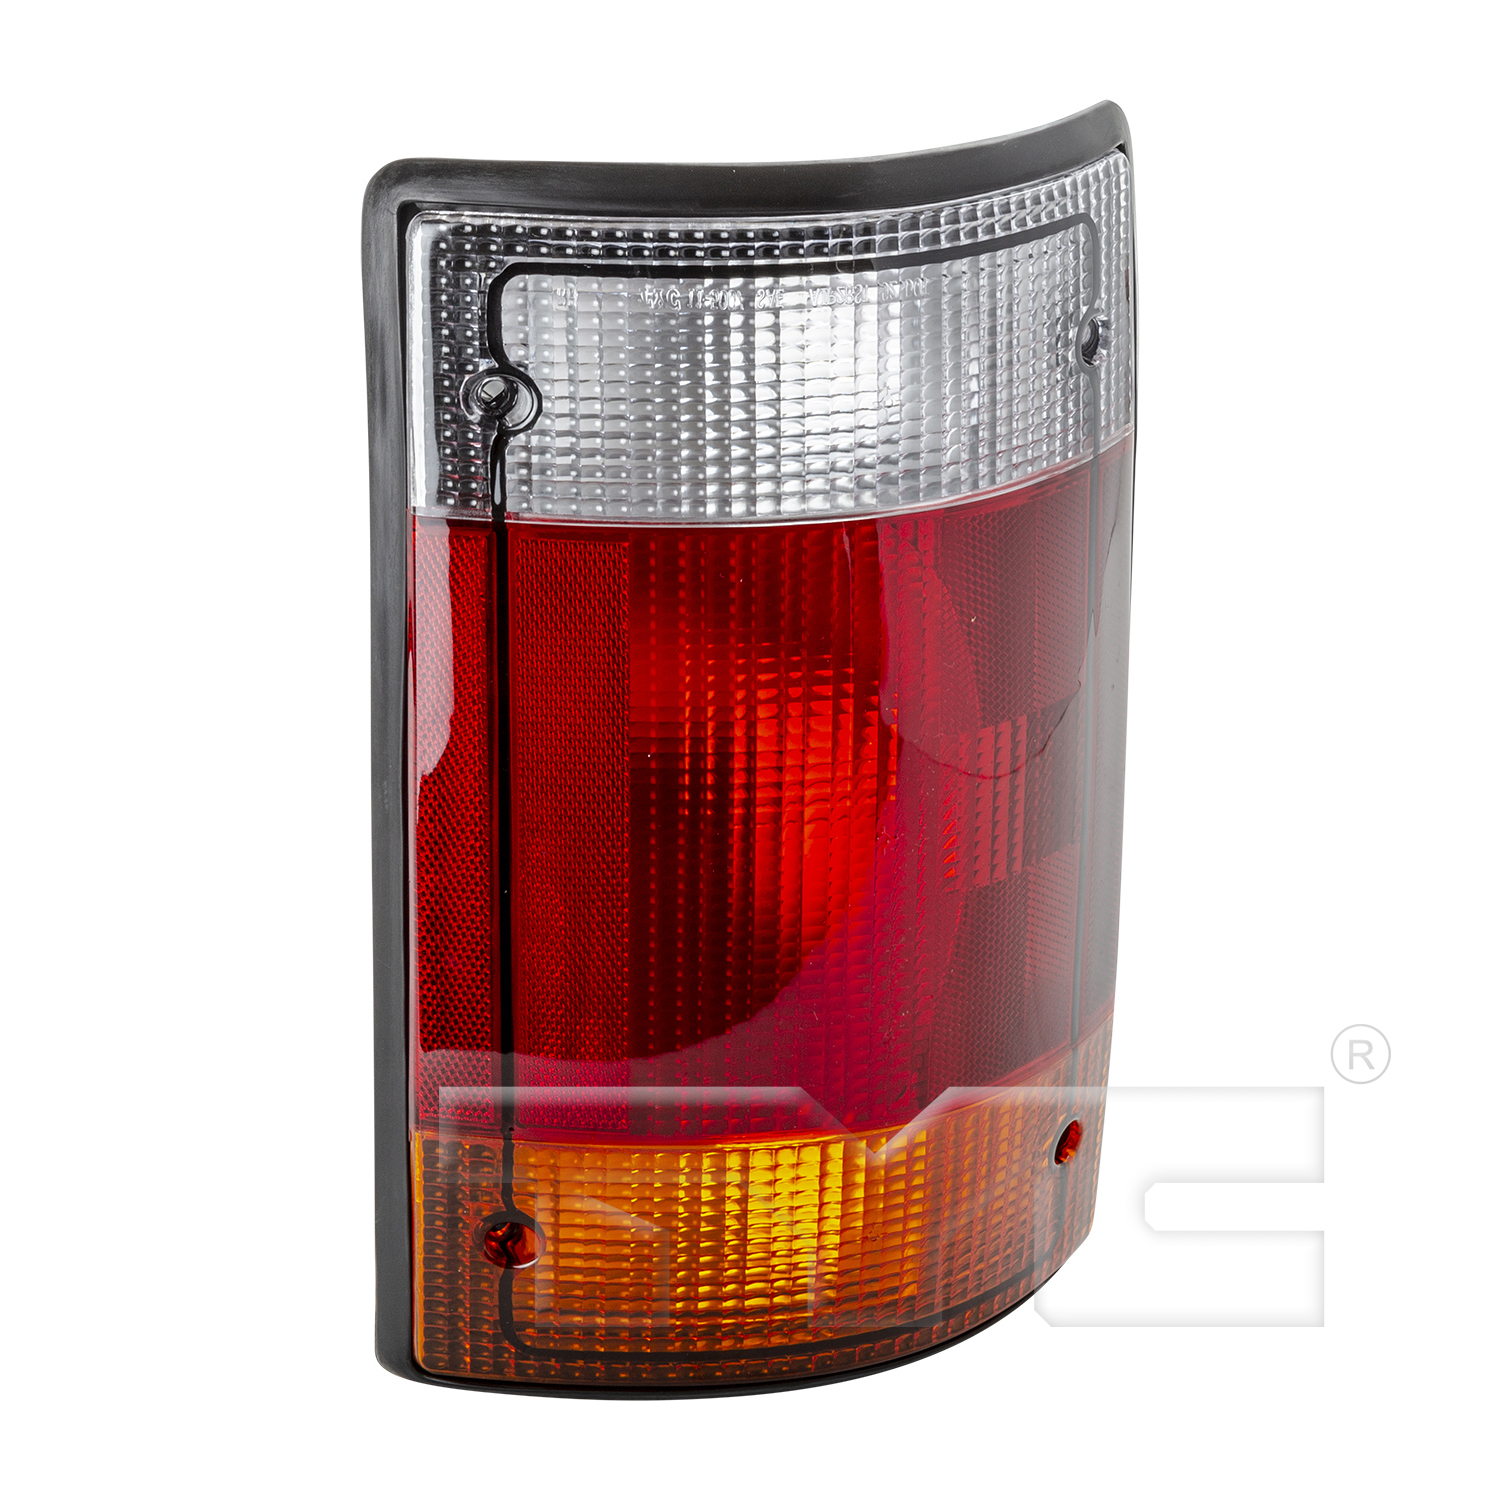 Aftermarket TAILLIGHTS for FORD - E-150 ECONOLINE, E-150 ECONOLINE,92-94,LT Taillamp assy